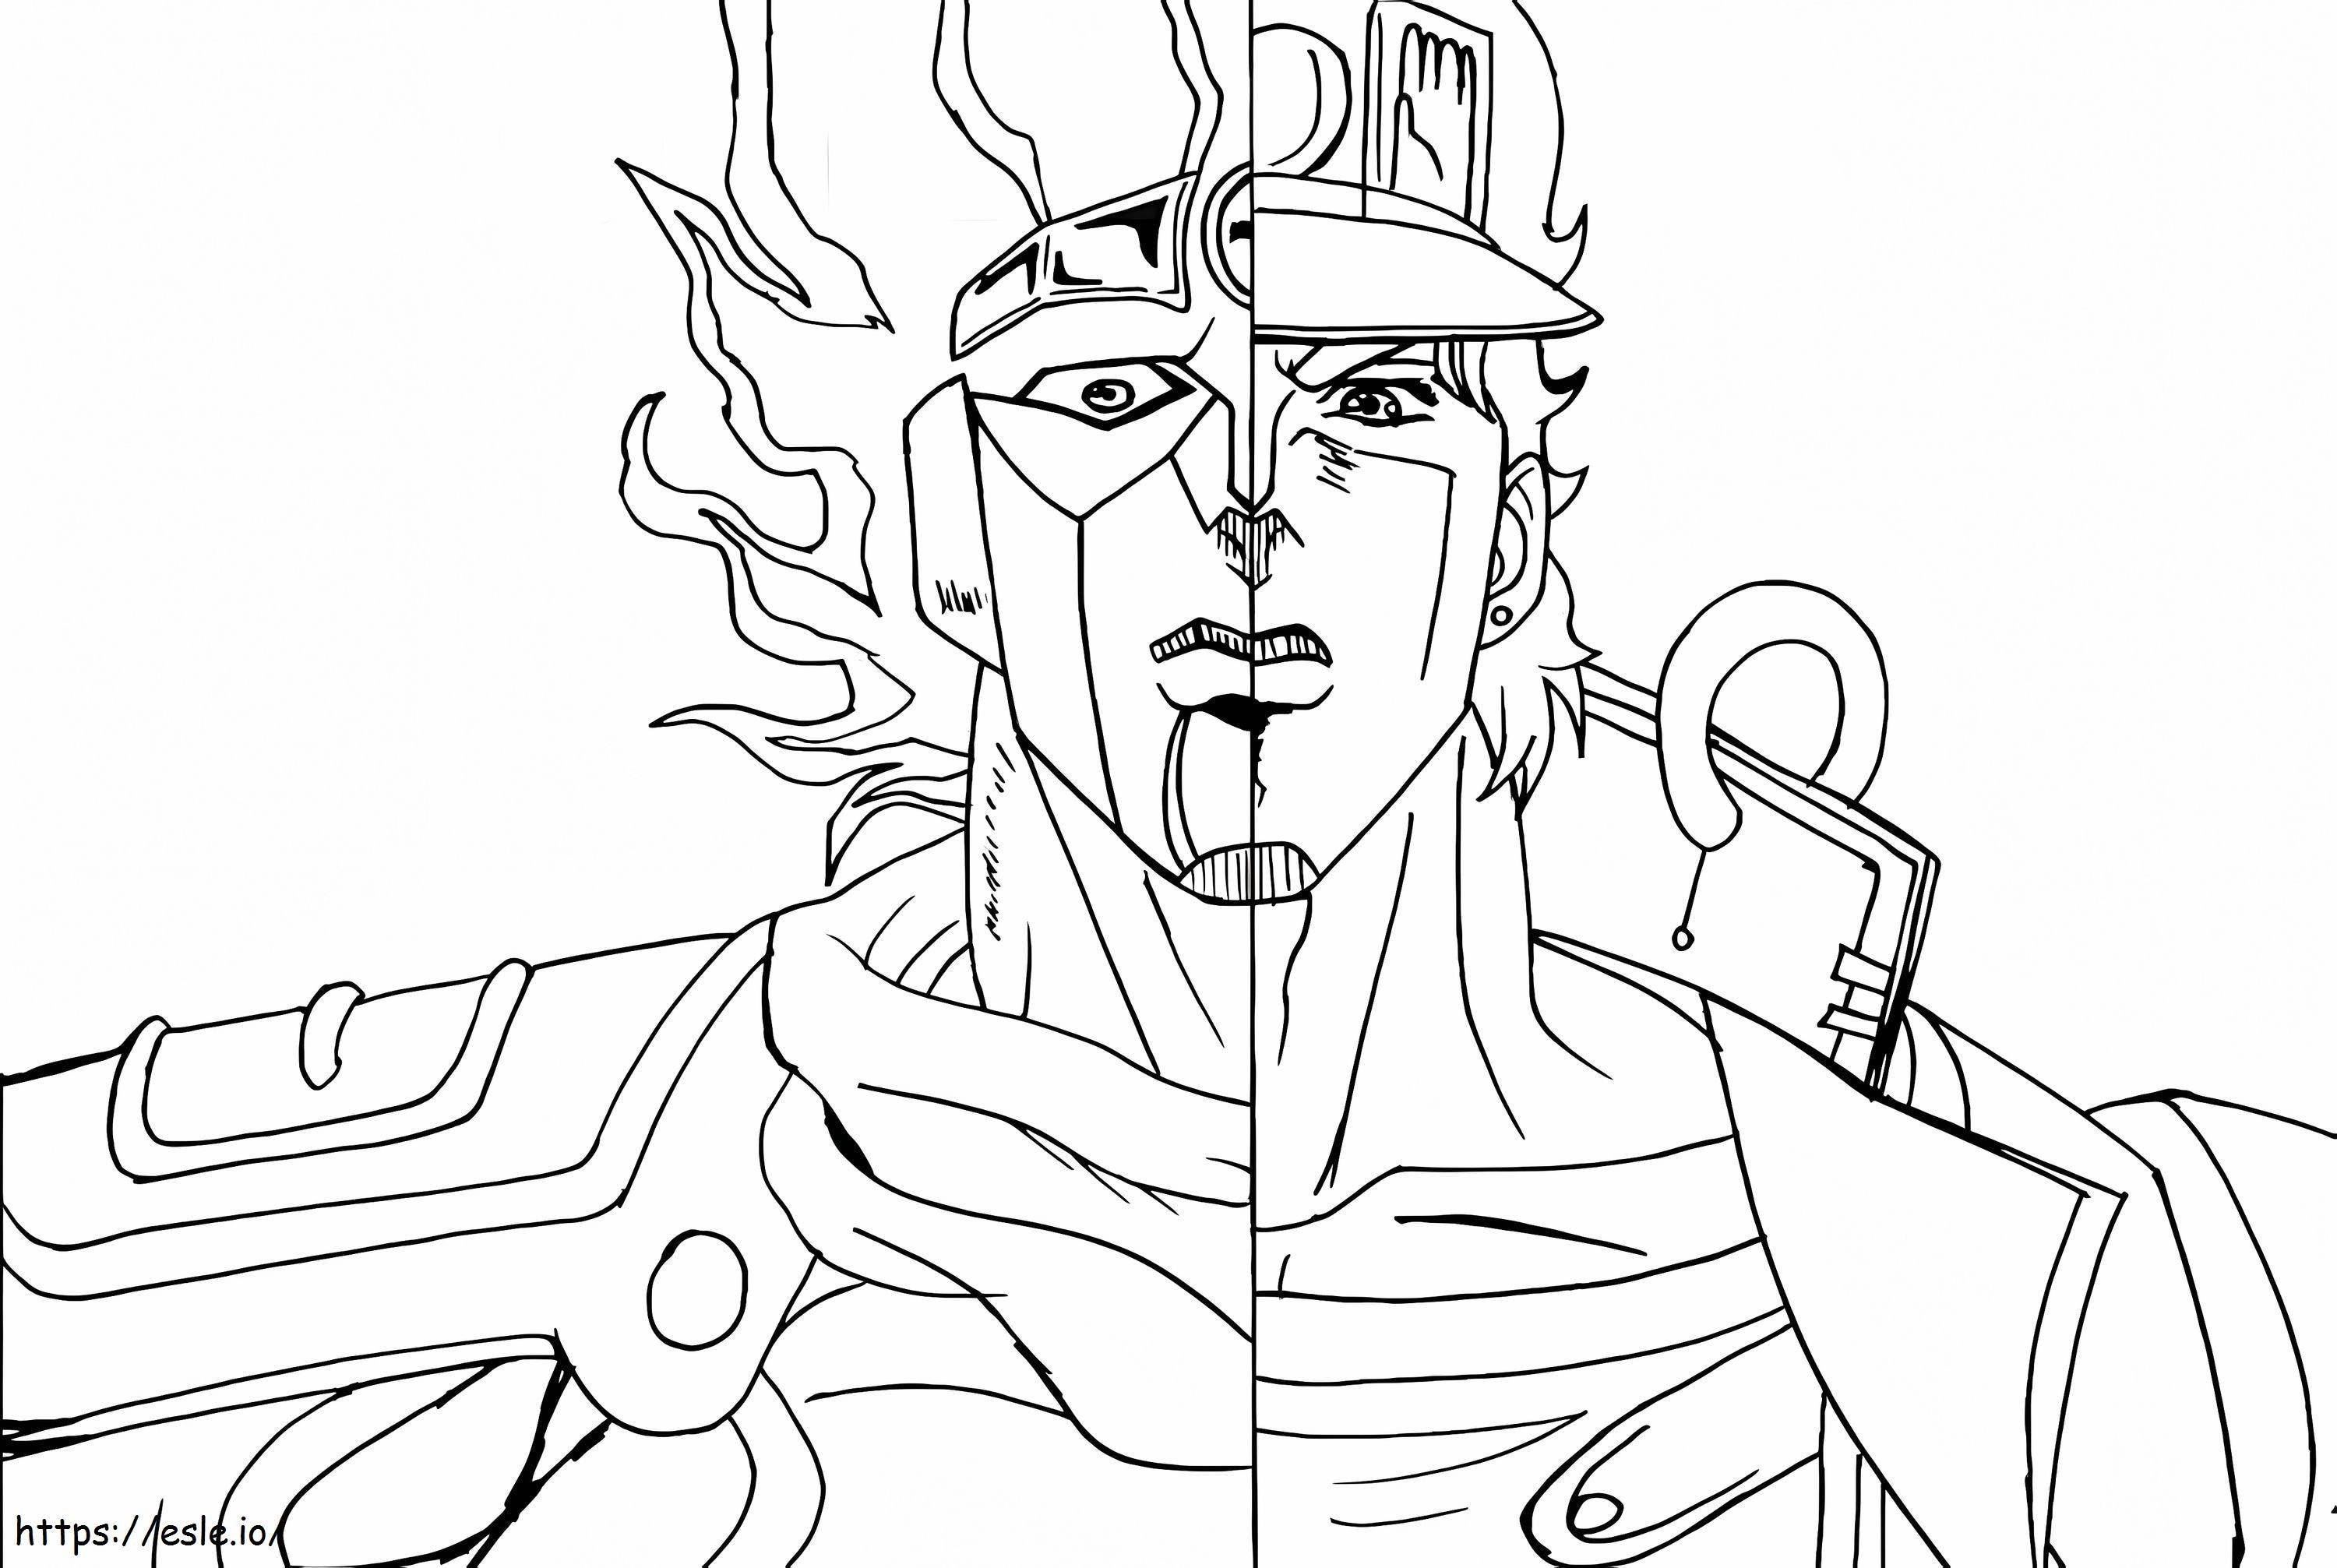 Jotaro And Star Platinum coloring page